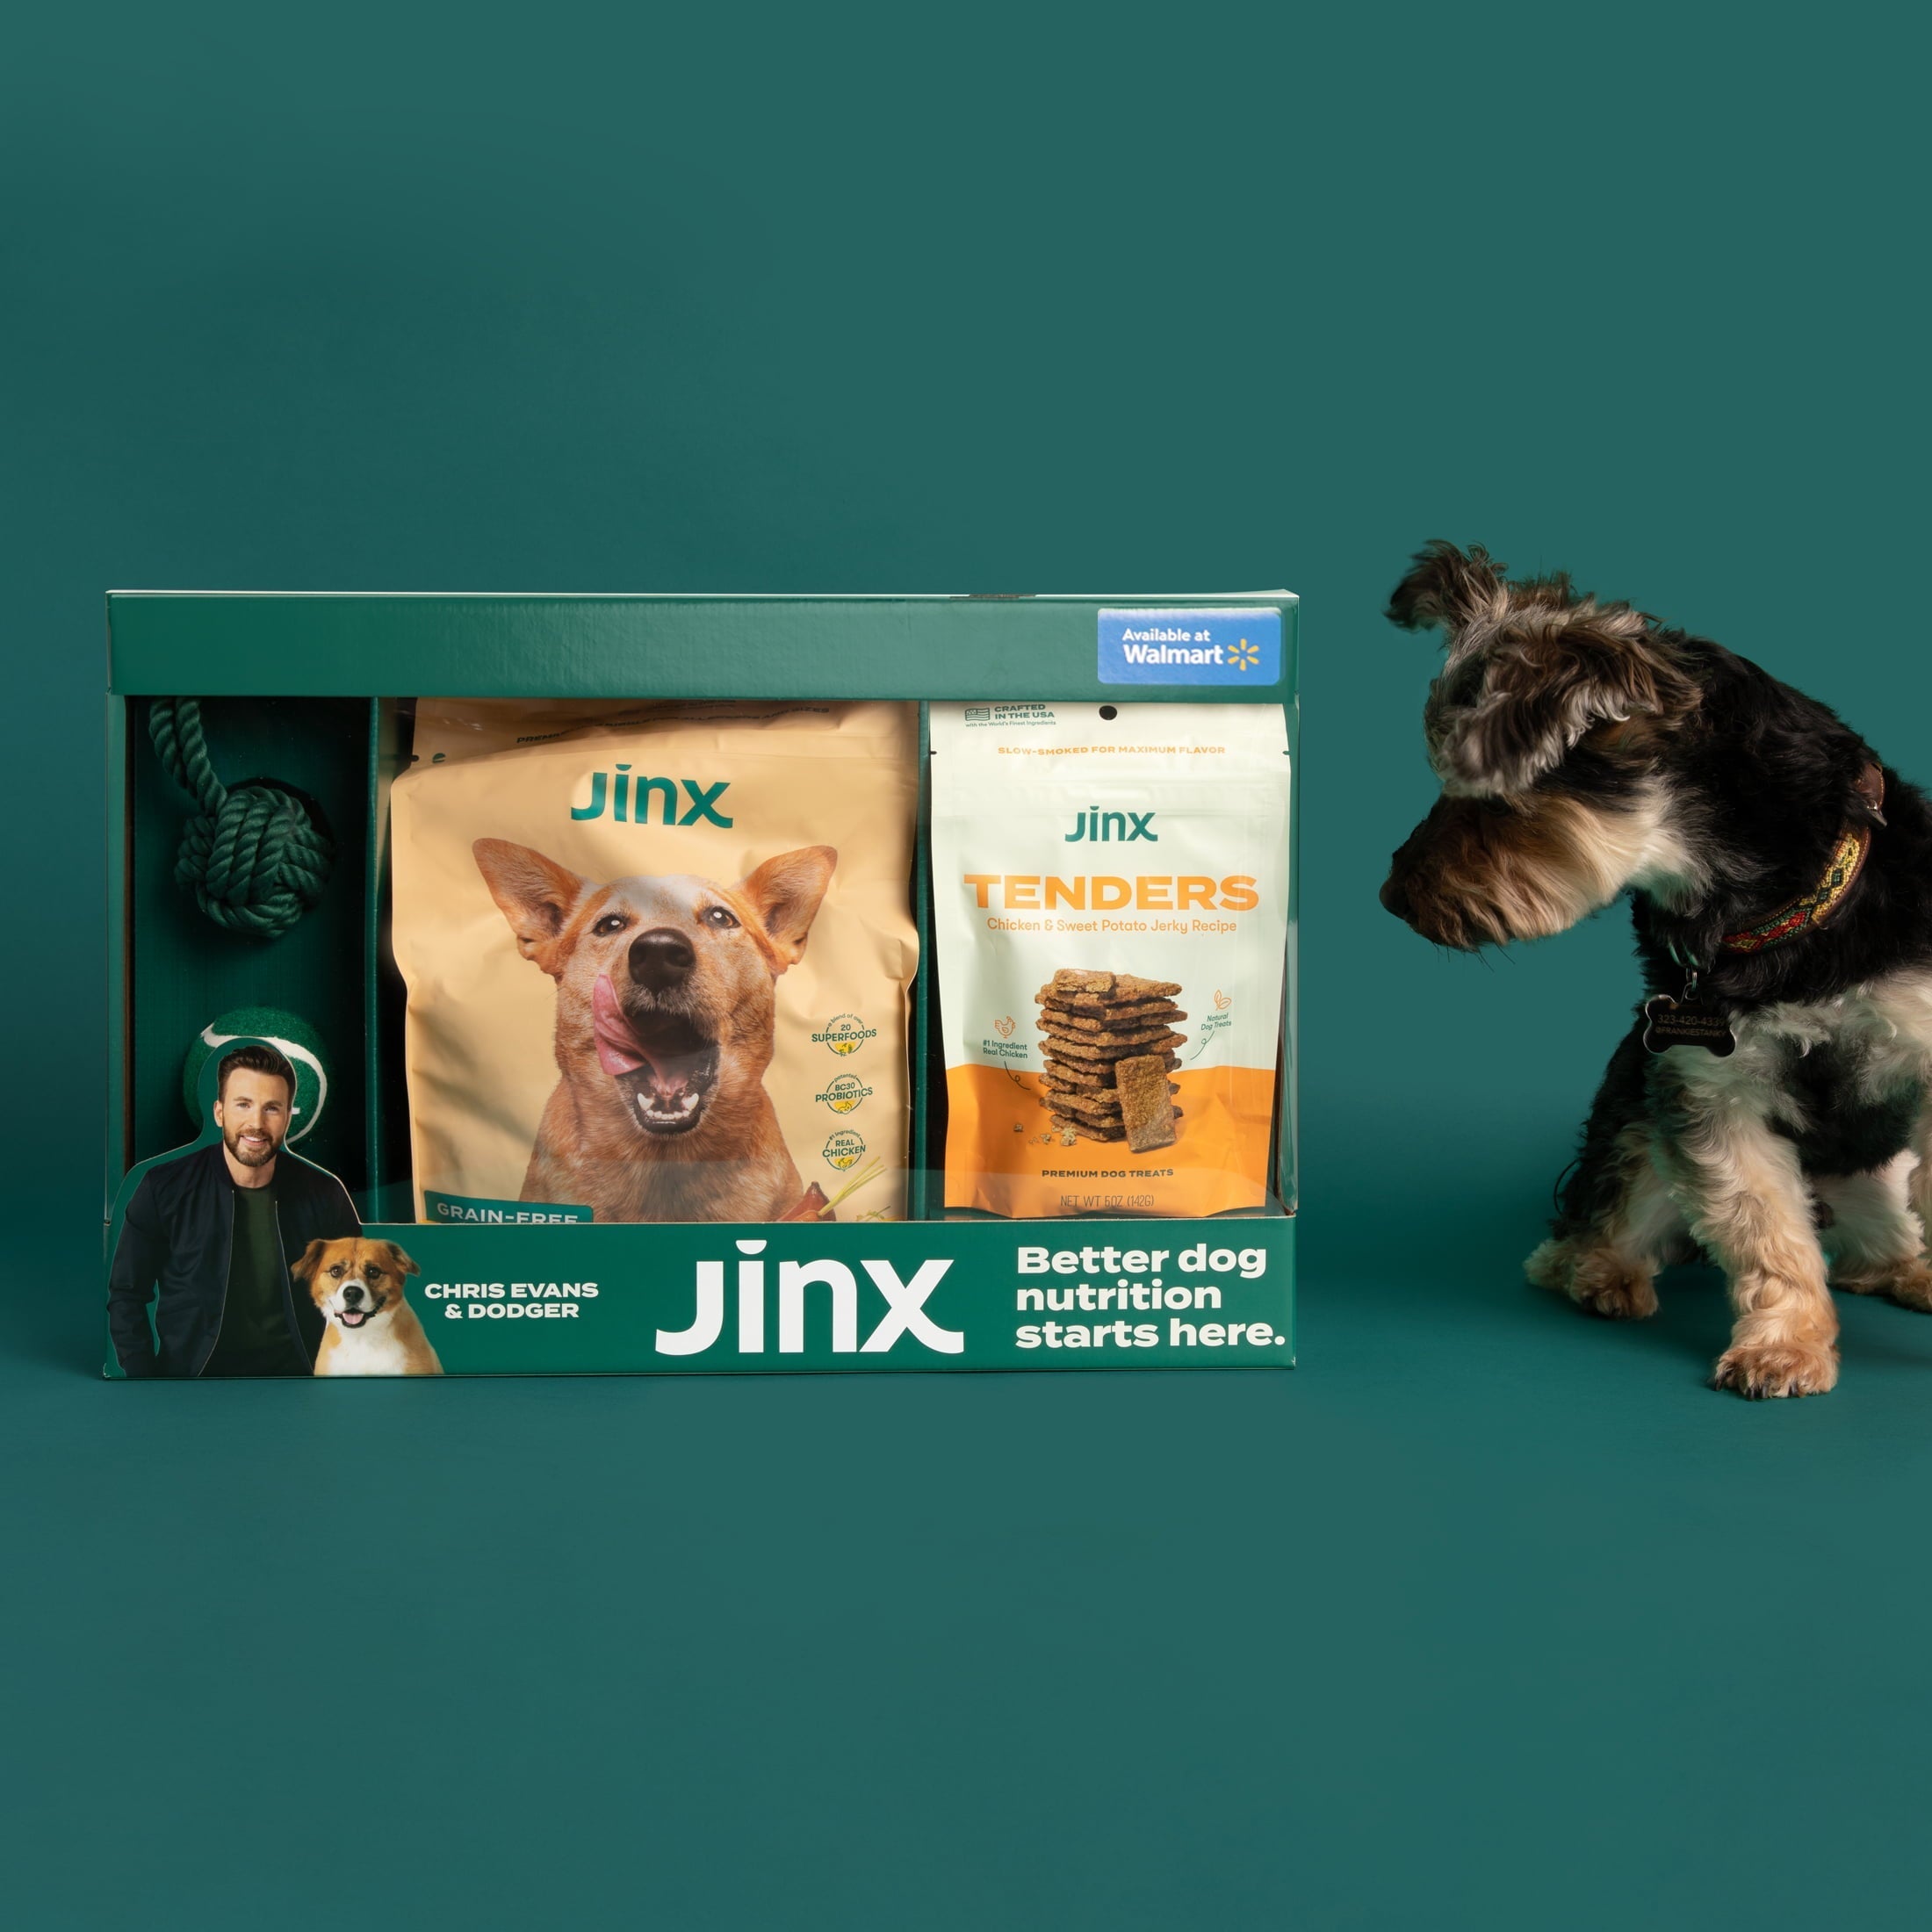 Wholesale prices with free shipping all over United States Jinx & Chris Evans Dog Dream Box - Steven Deals